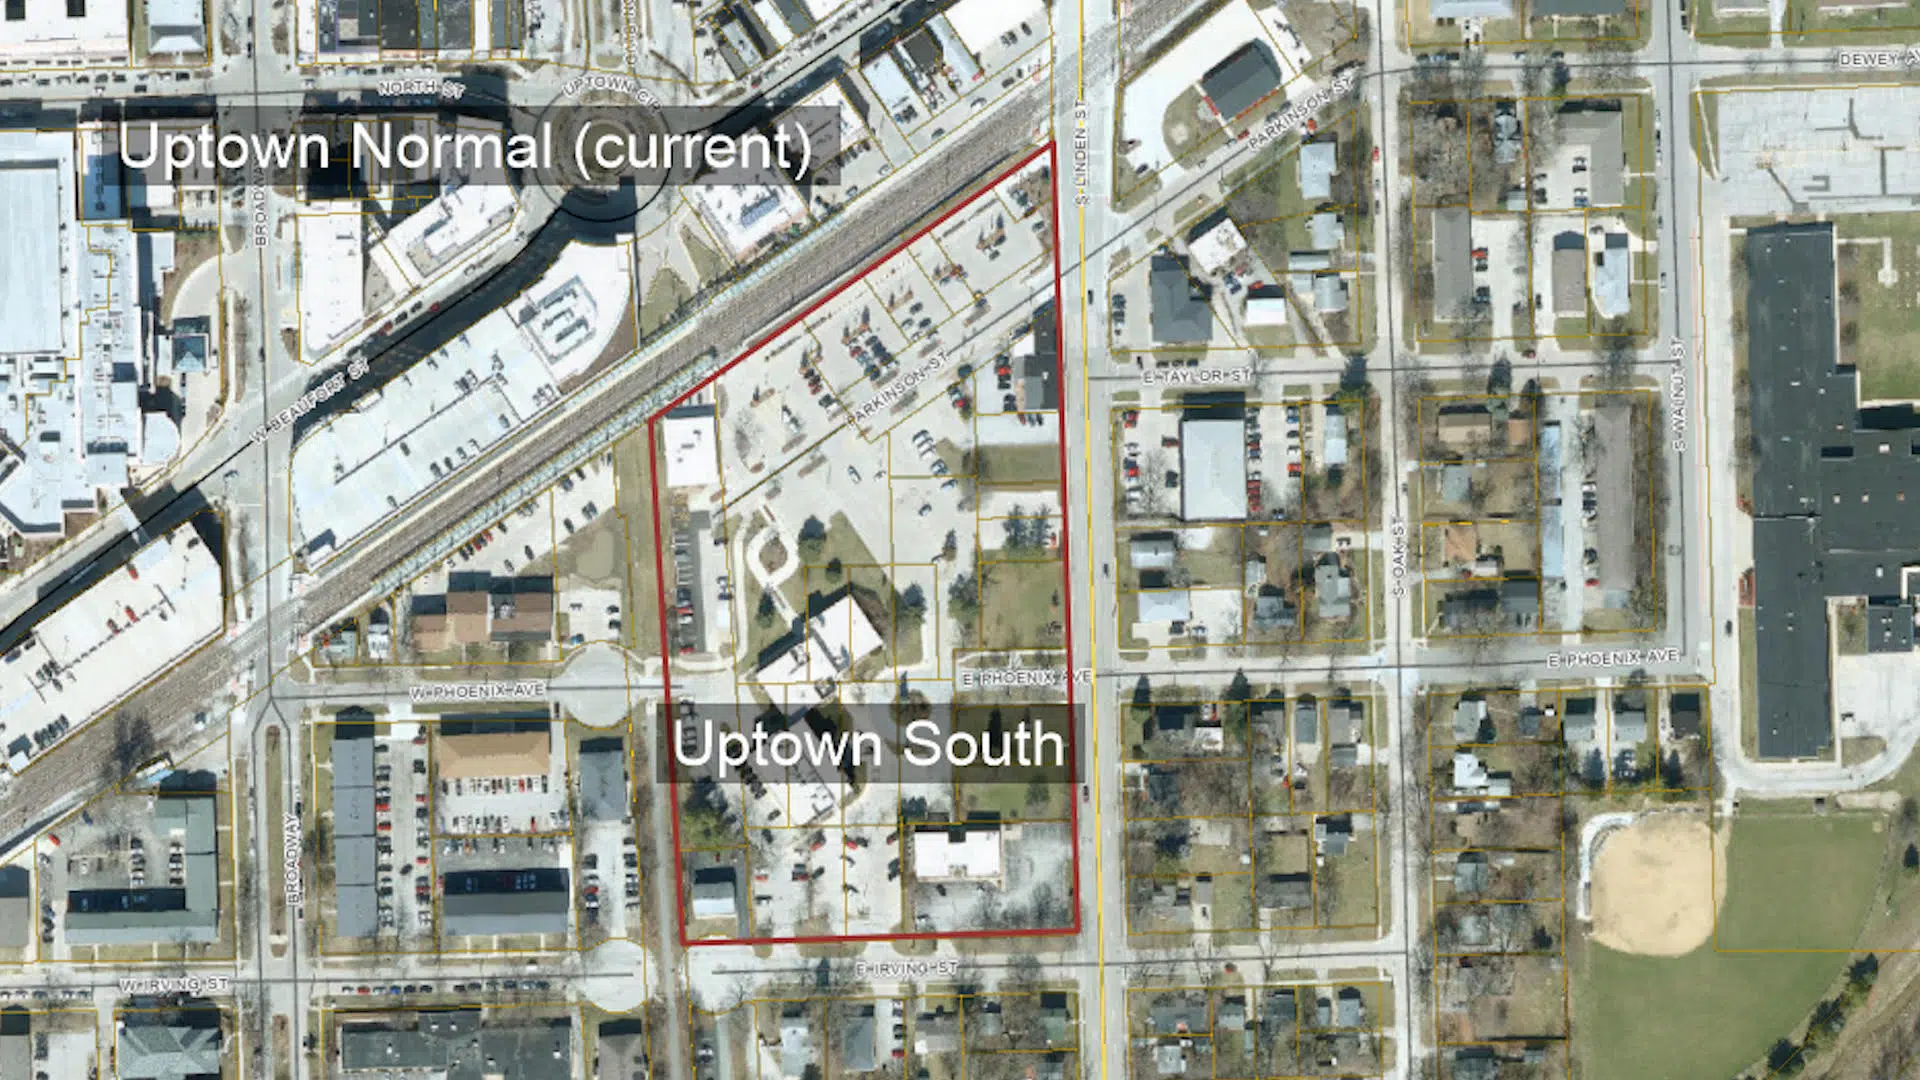 Hazardous Gulley Not on The Agenda Tonight, But Uptown South Is